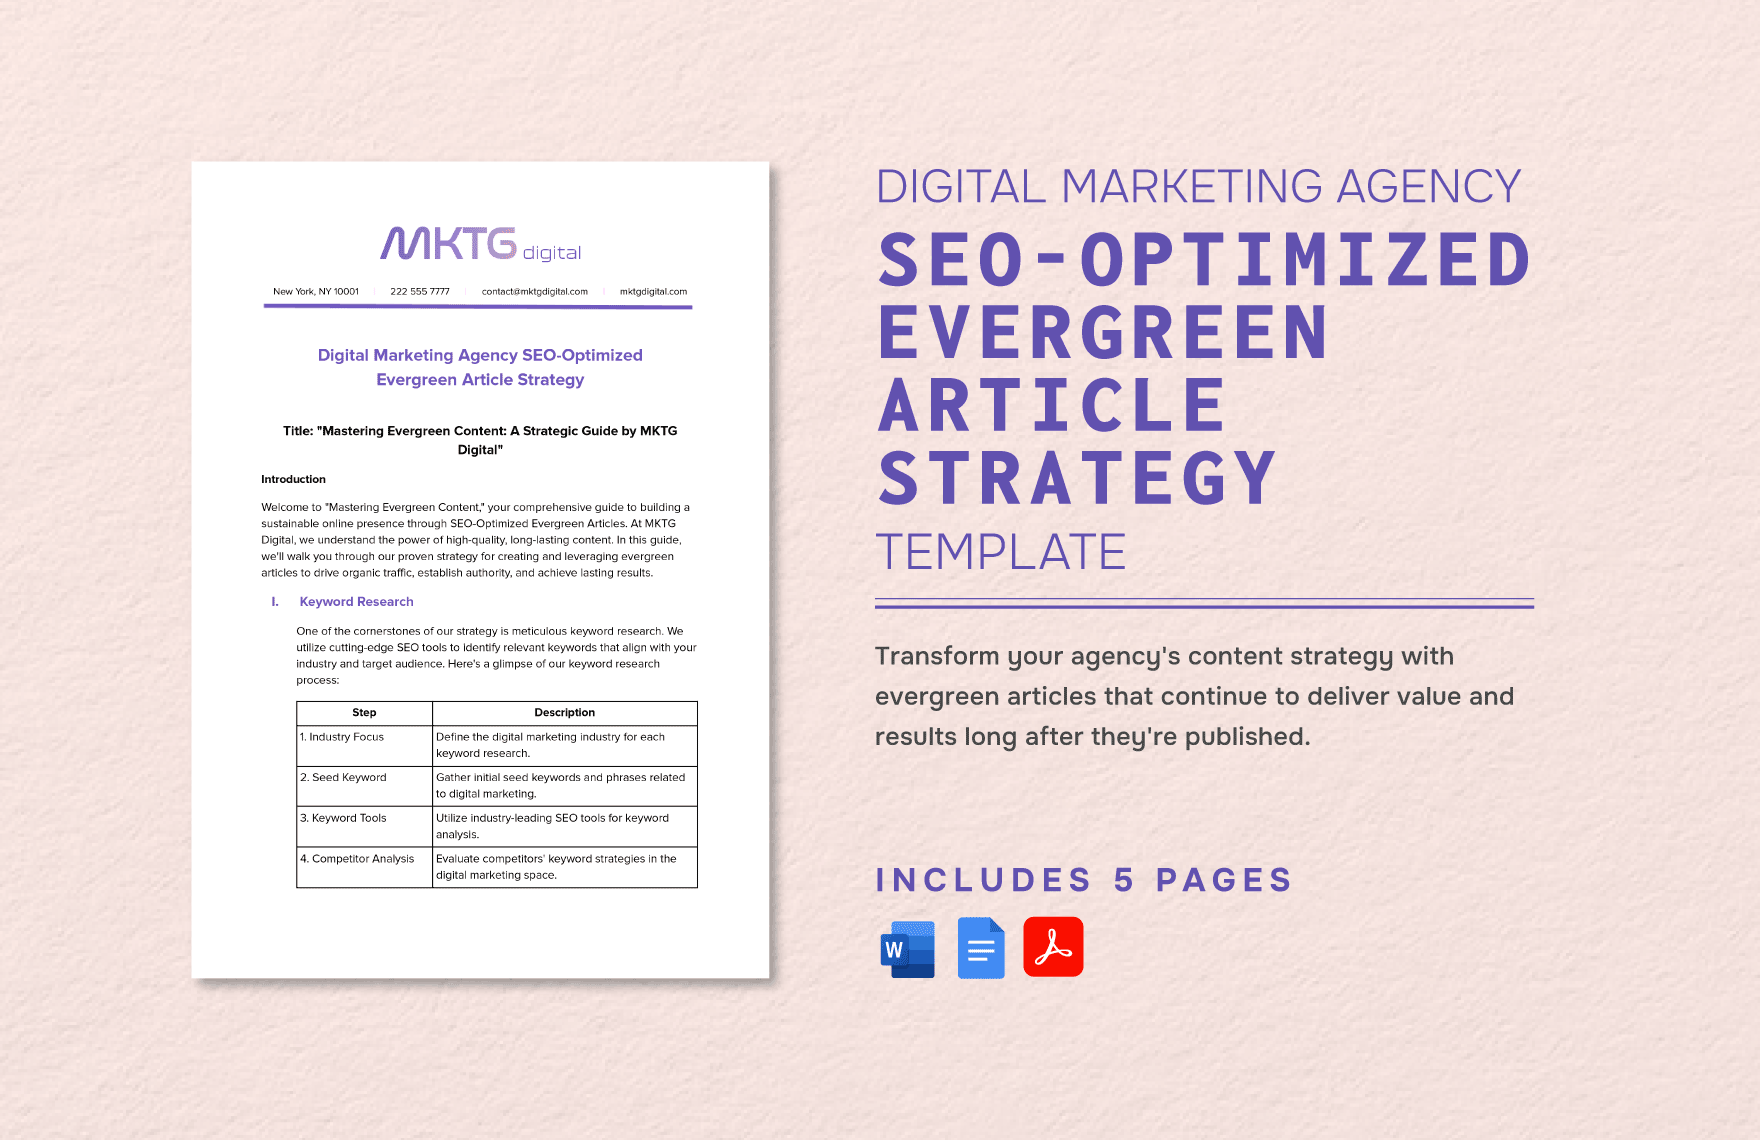 Digital Marketing Agency SEO-Optimized Evergreen Article Strategy Template in Word, Google Docs, PDF